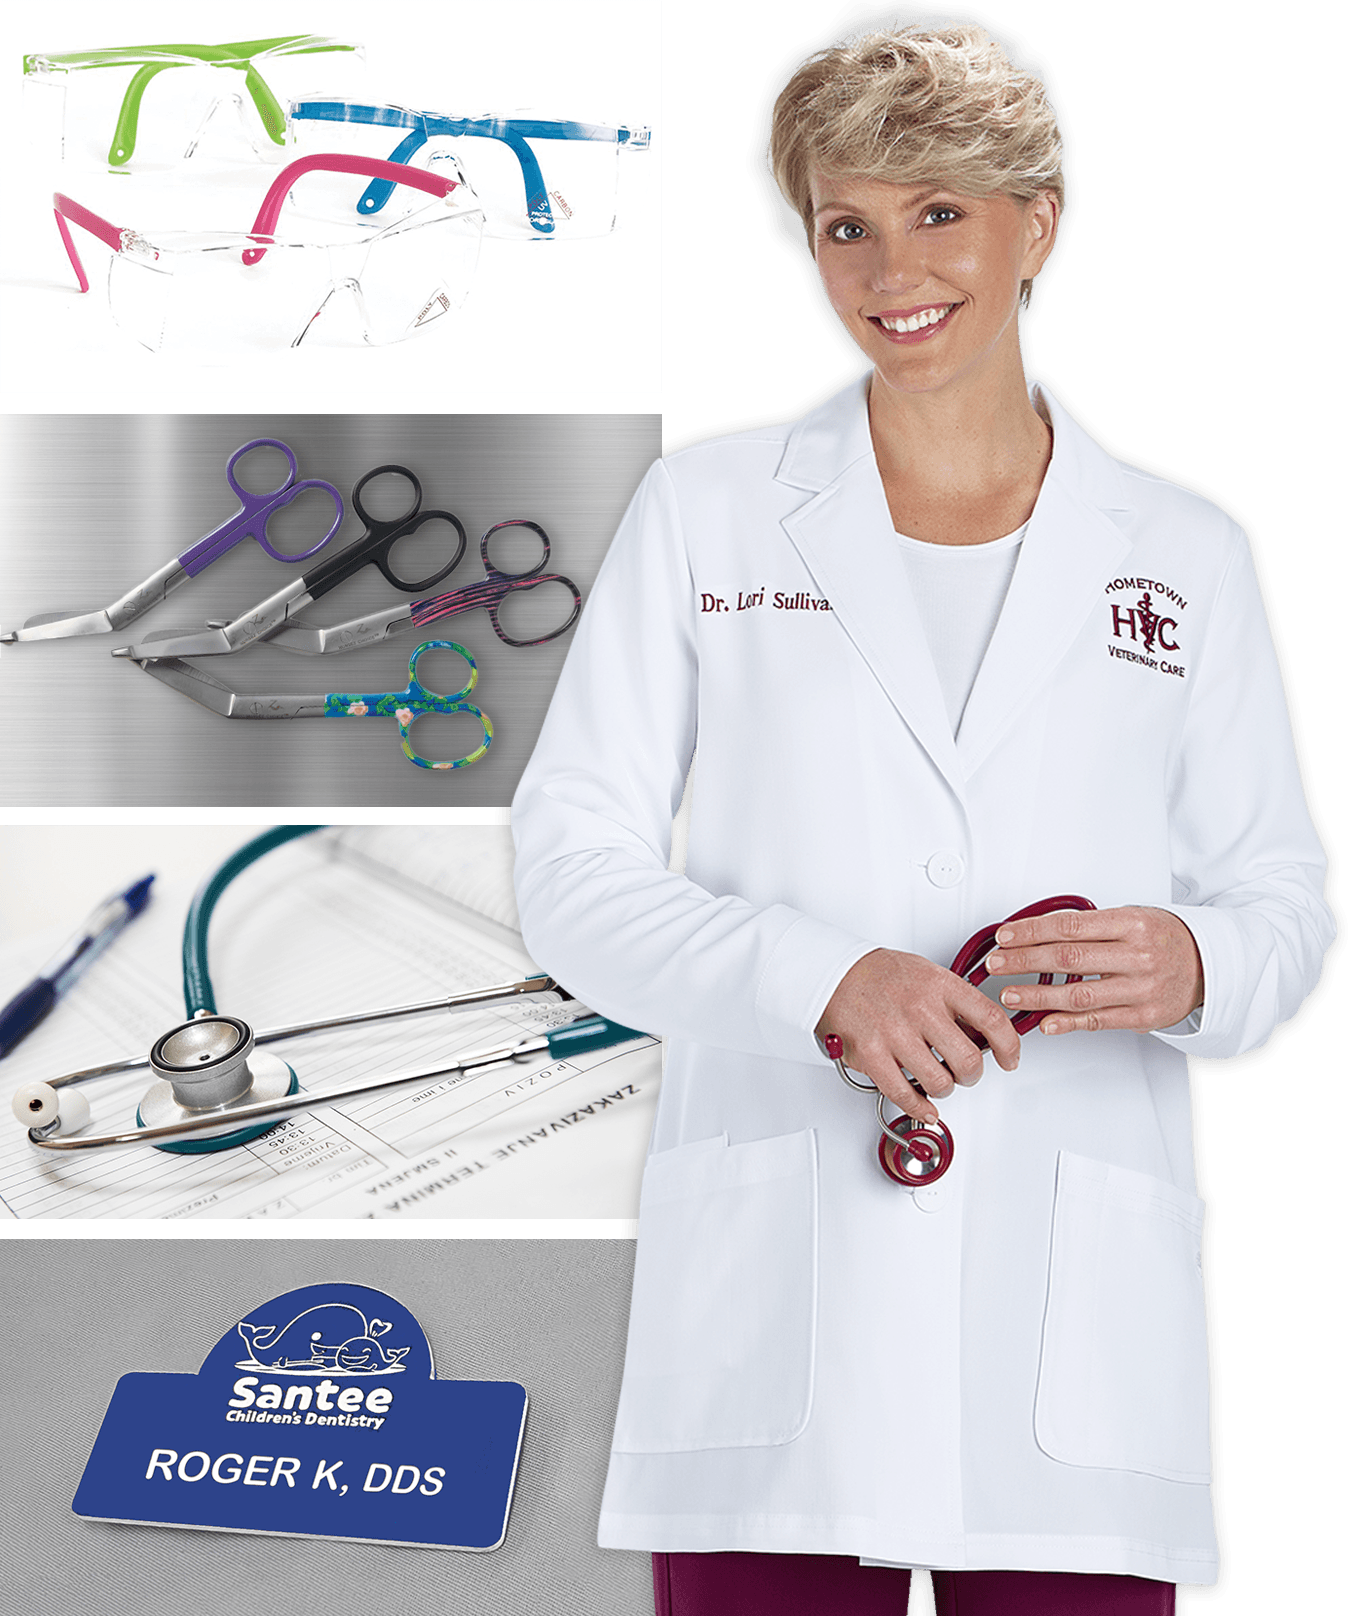 TheRightScrubs-Accessories-Medical-Accessories